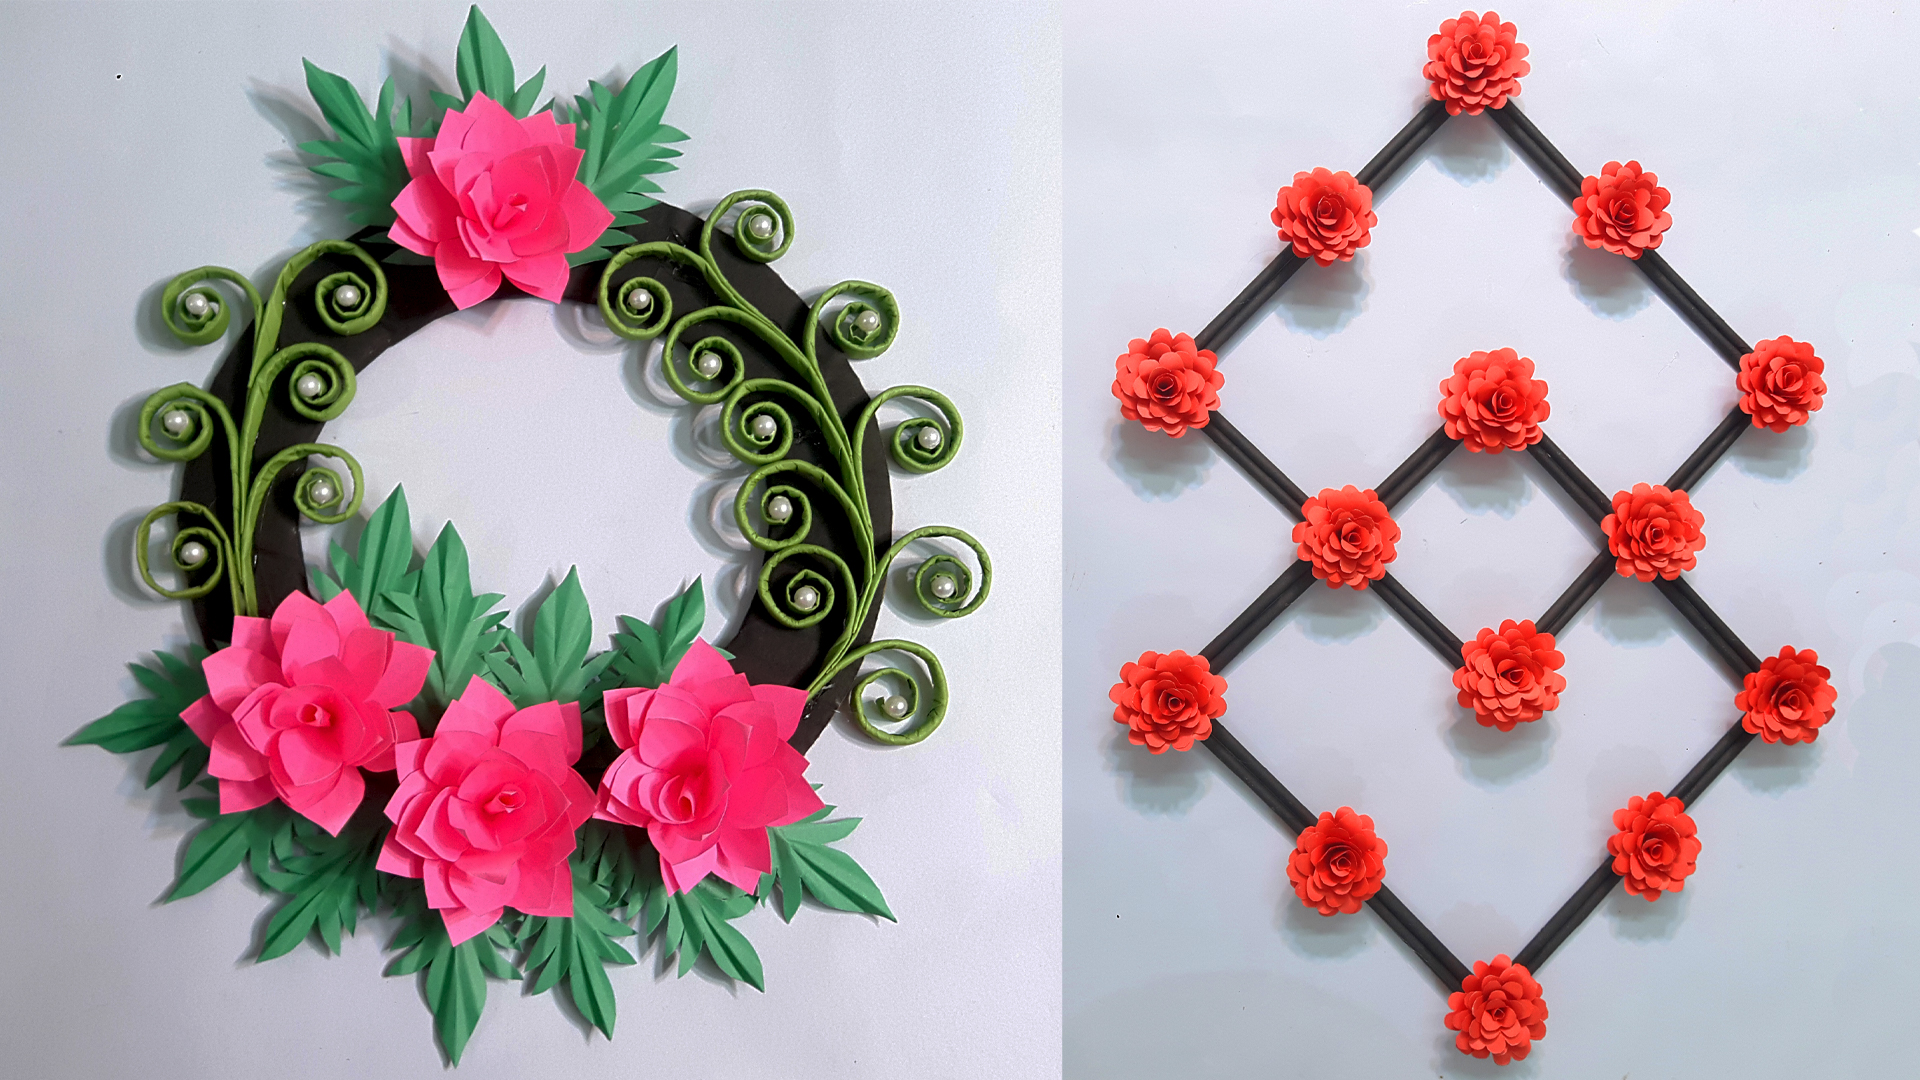 diy / wall decoration ideas / wall hanging craft paper flowers